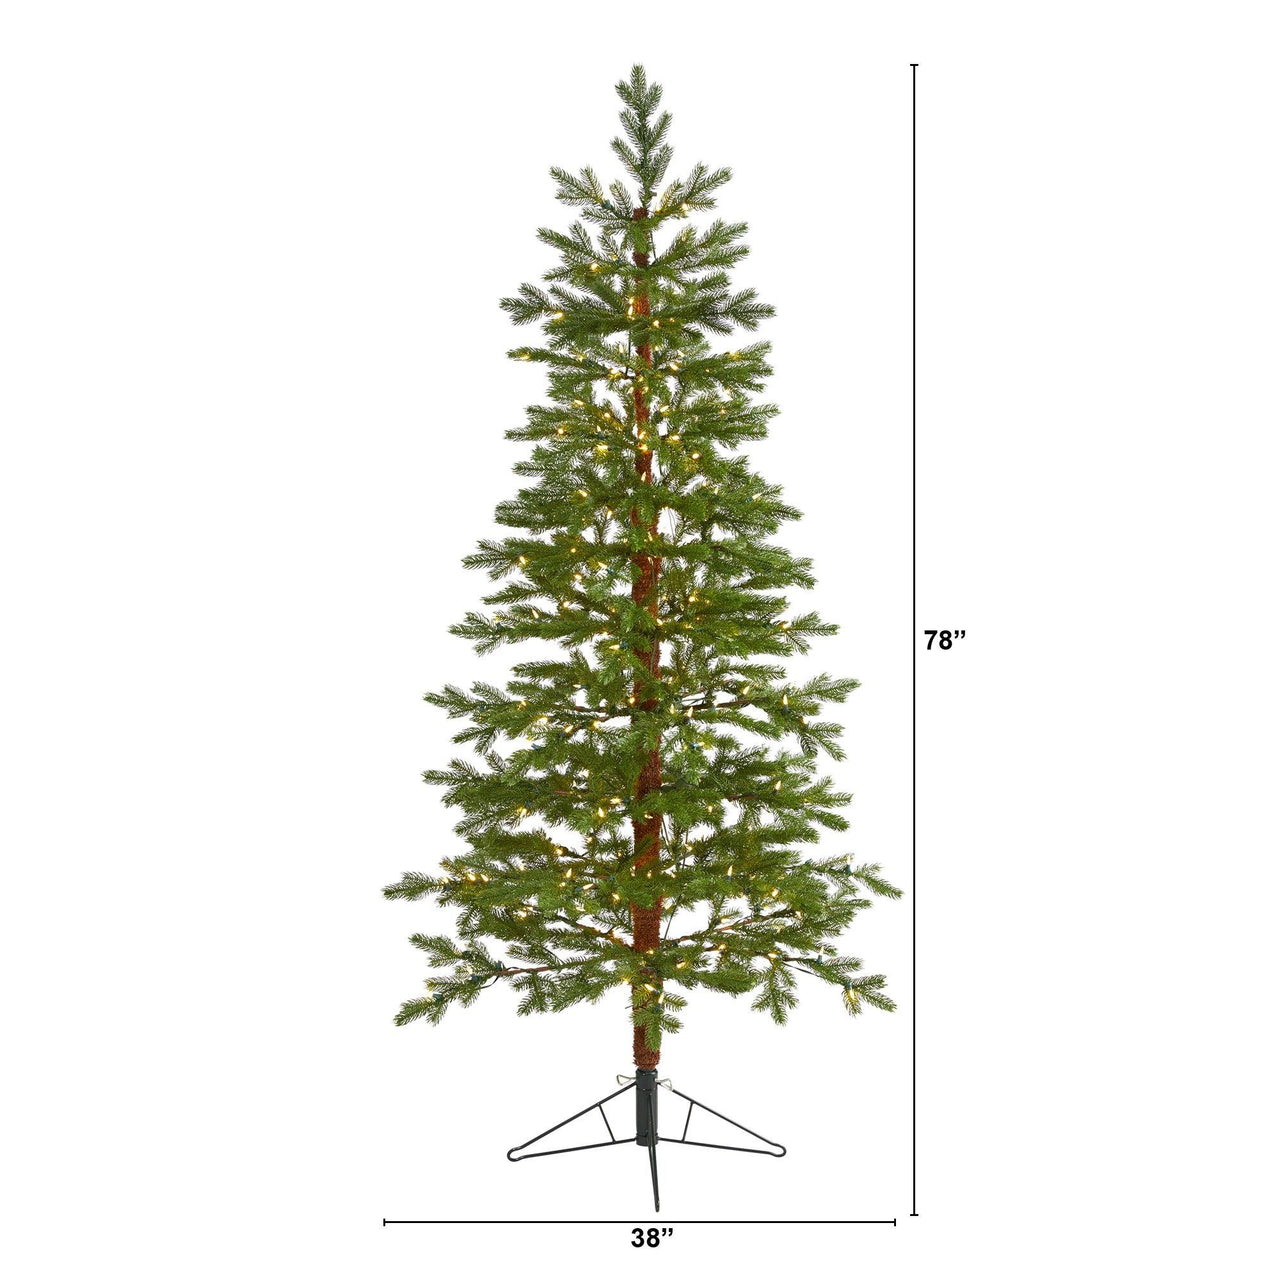 6.5' Fairbanks Fir Artificial Christmas Tree with 250 Clear Warm (Multifunction) LED Lights and 208 Bendable Branches - The Fox Decor